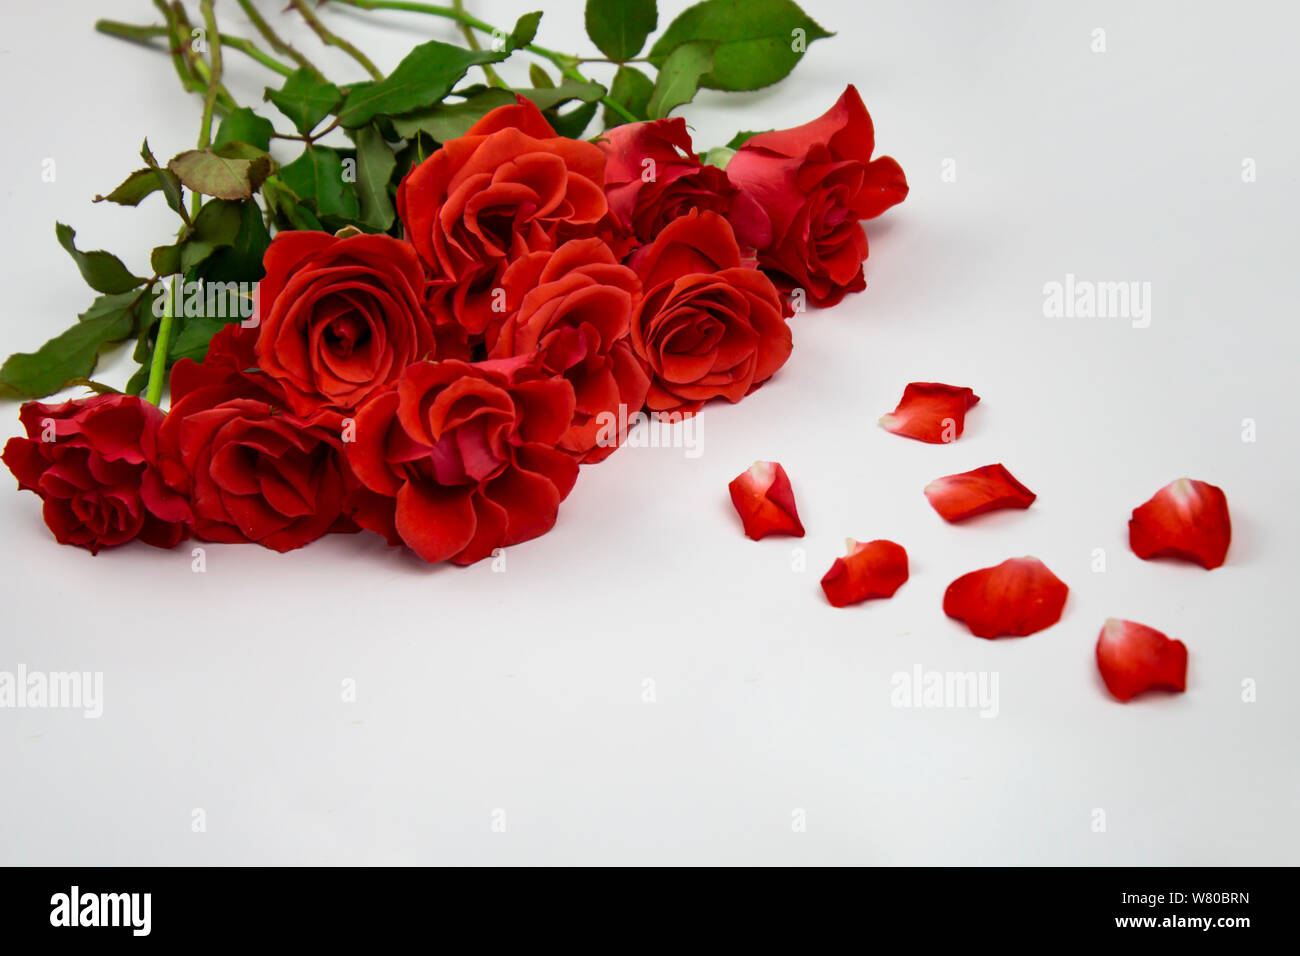 Top 999+ beautiful rose flowers images – Amazing Collection beautiful rose flowers images Full 4K